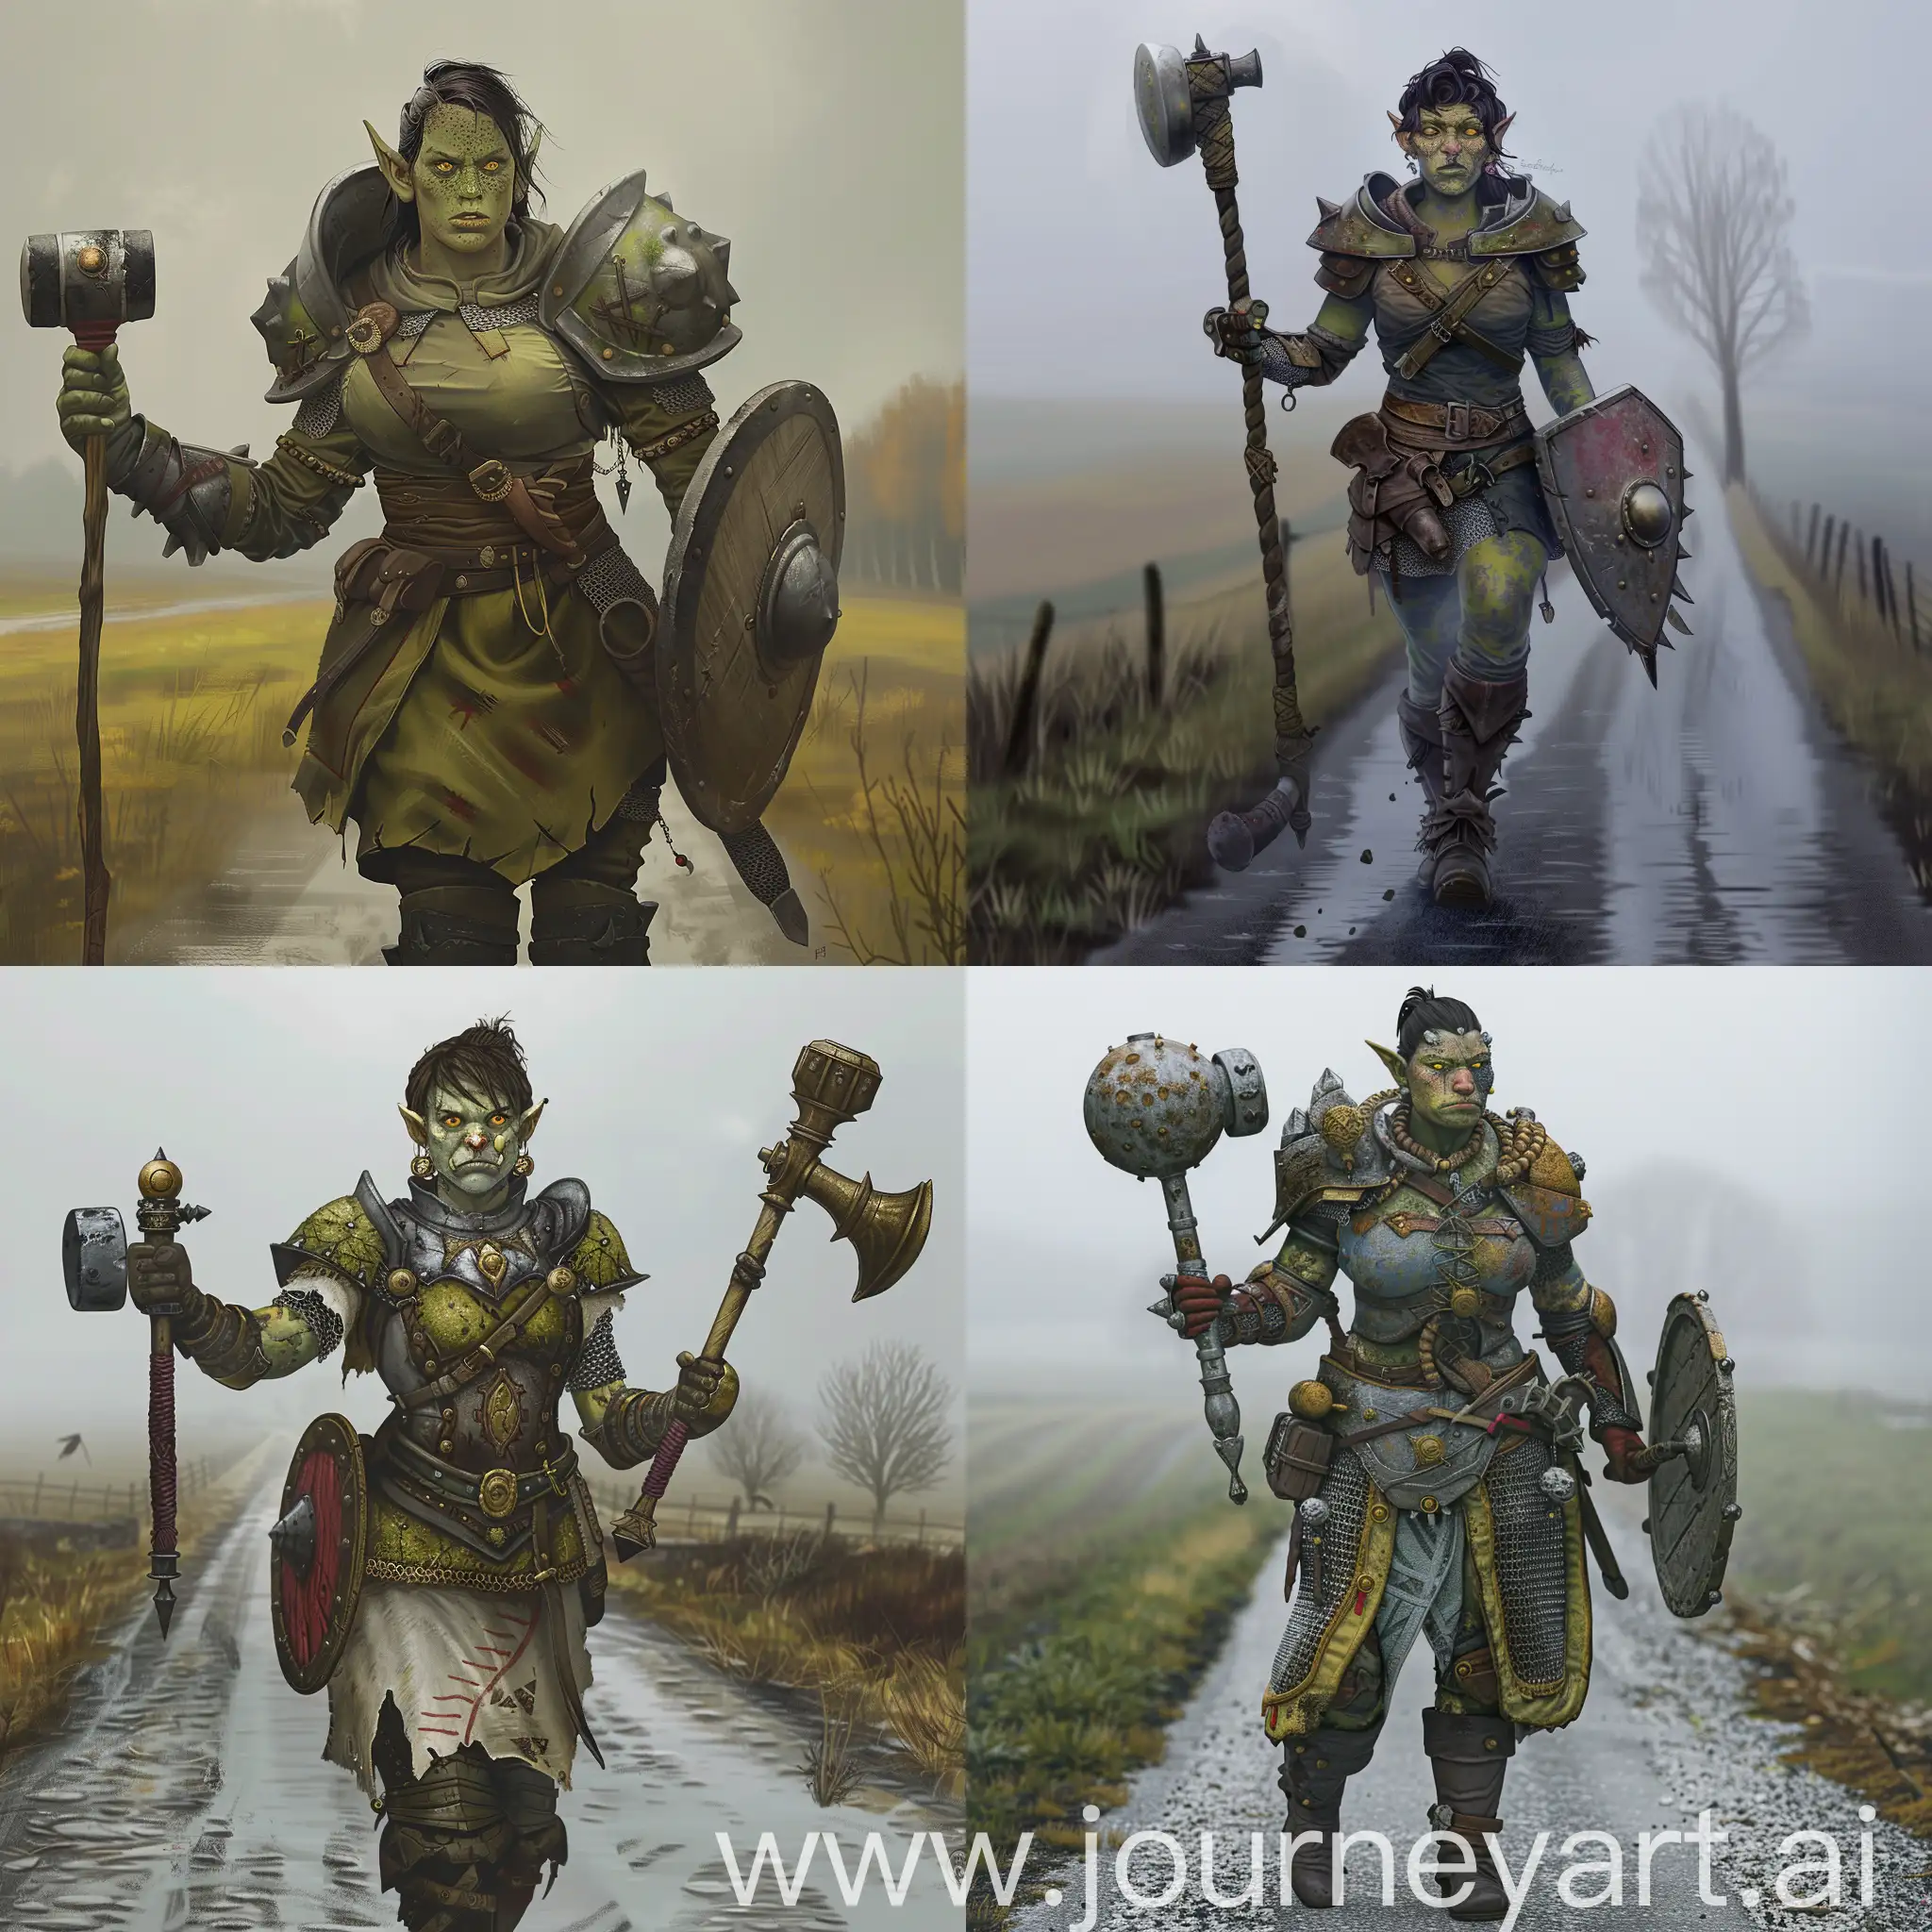 Strong-HalfOrc-Knight-with-Battle-Mace-and-Shield-on-Country-Road-in-Fog